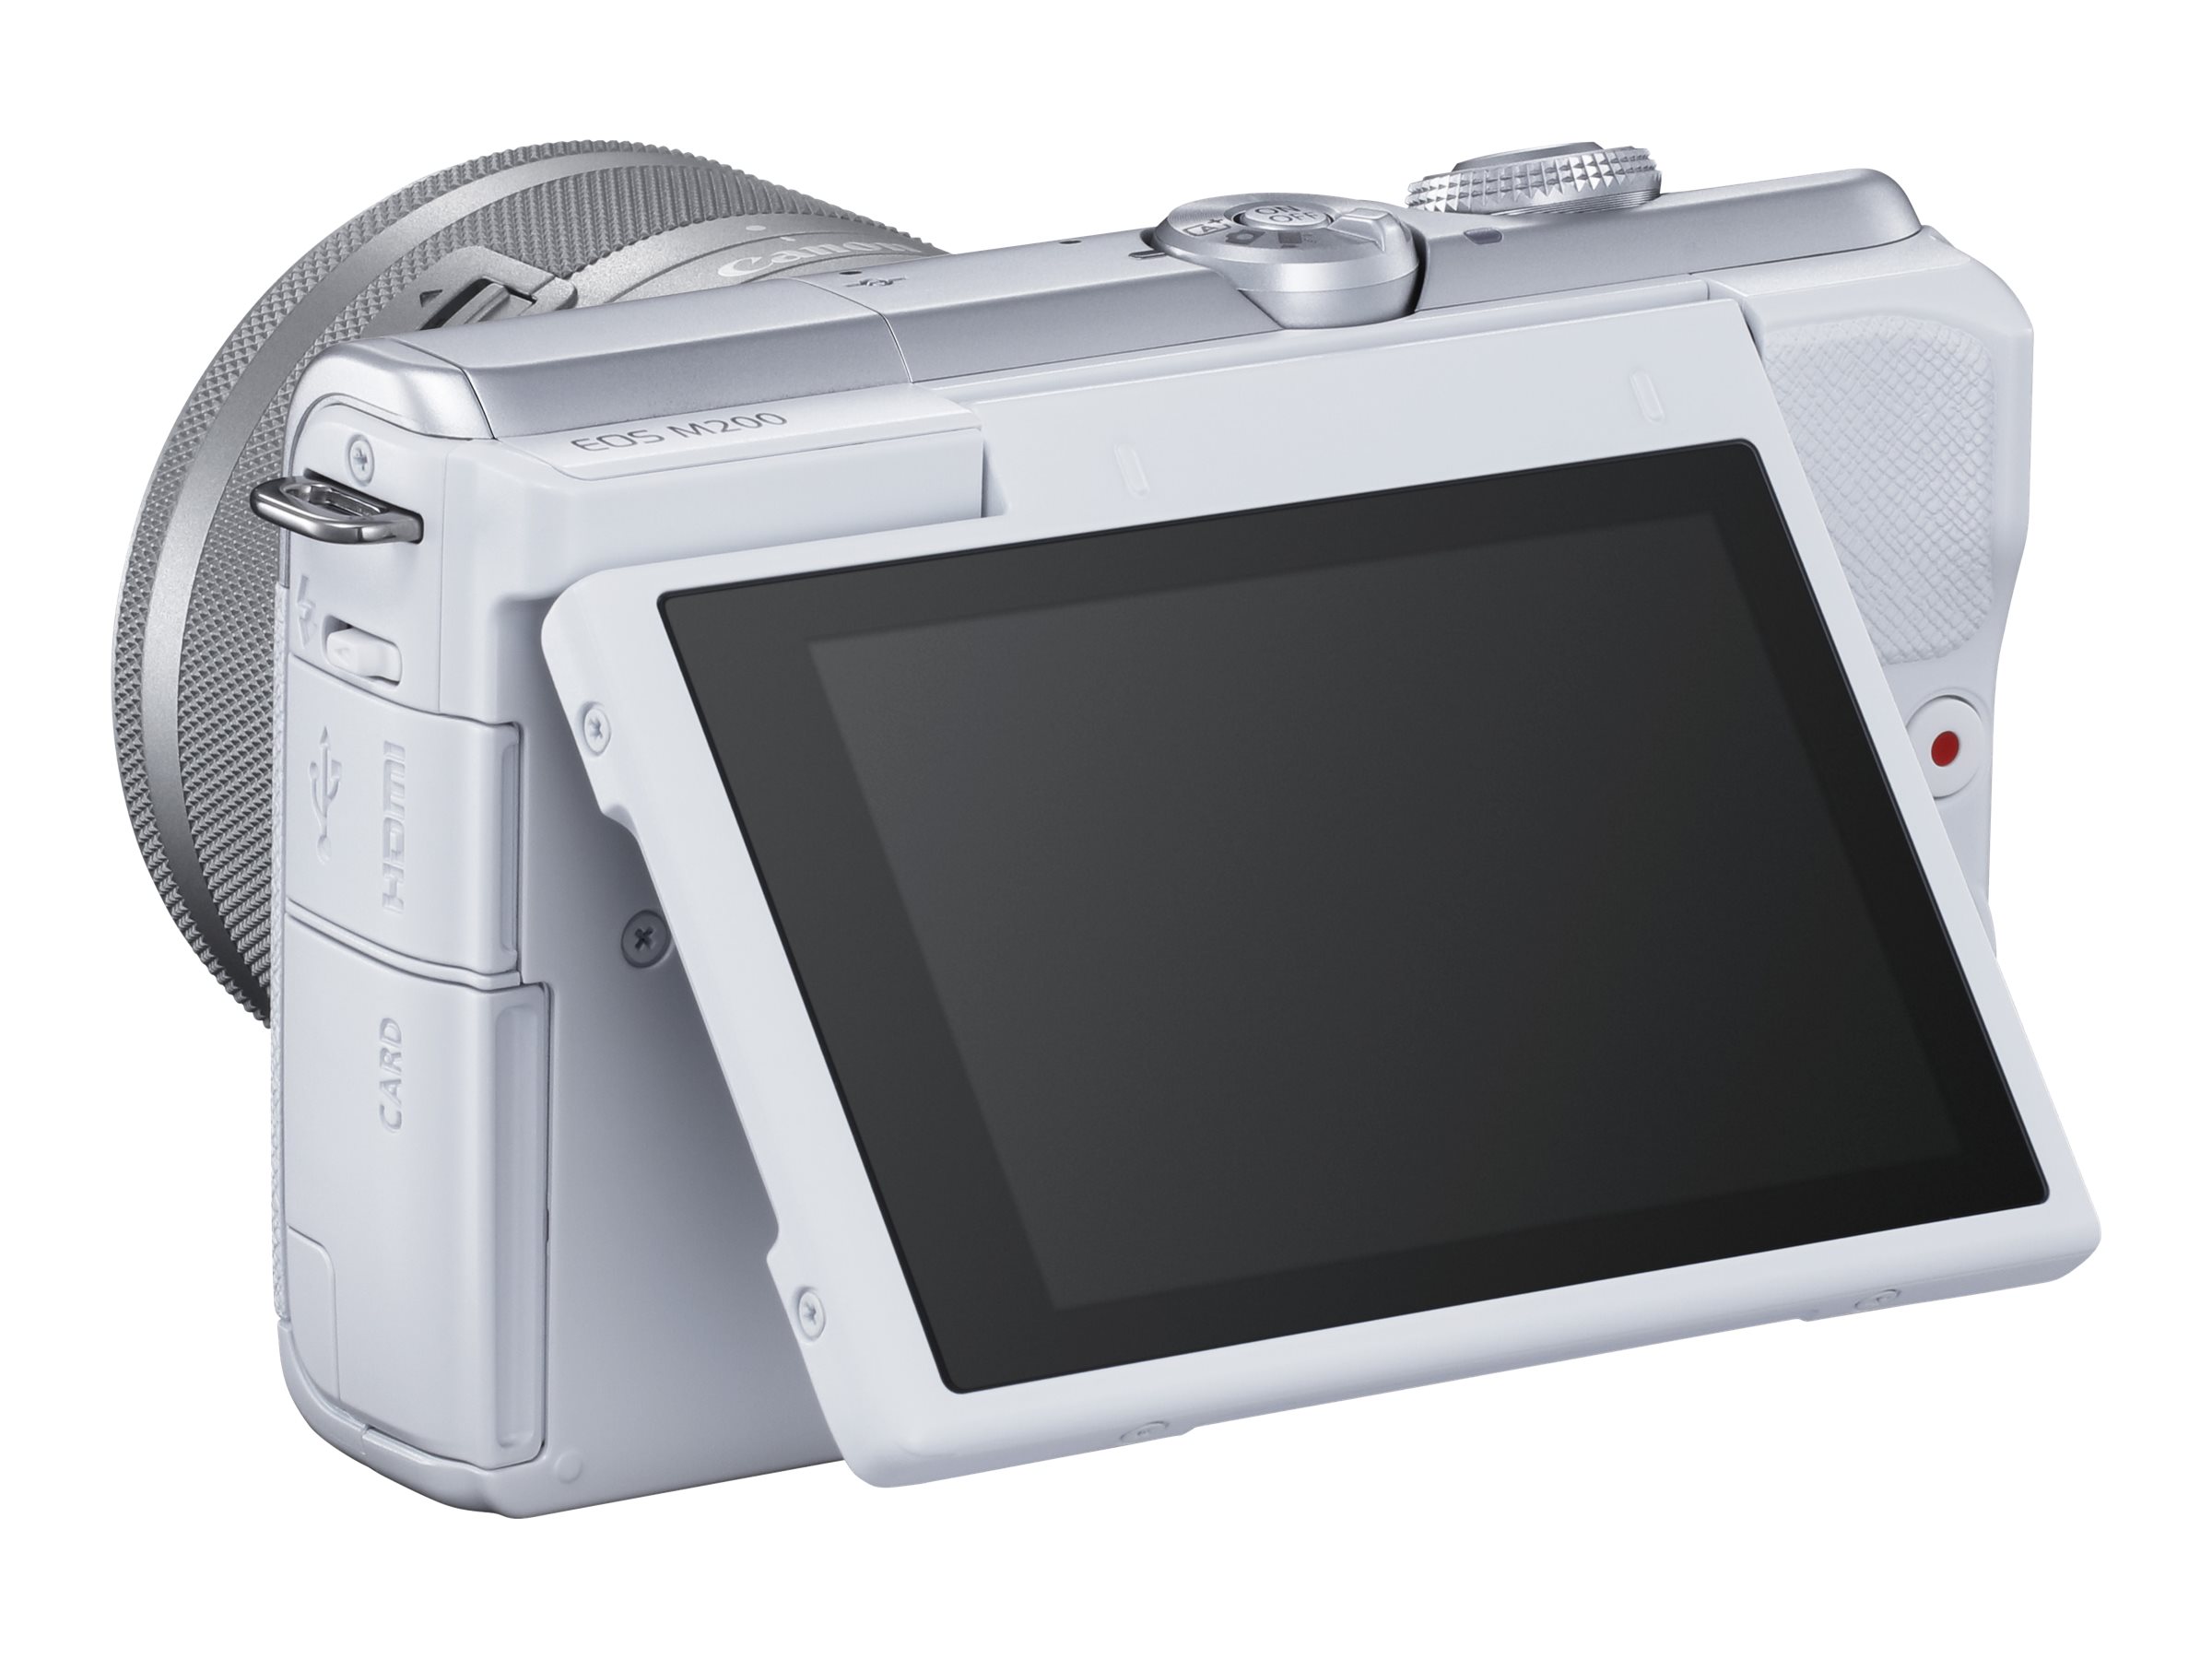 Canon EOS M200 - Digital camera - mirrorless - 24.1 MP - APS-C - 4K / 25 fps - 3x optical zoom EF-M 15-45mm IS STM lens - Wi-Fi, Bluetooth - white - image 2 of 3